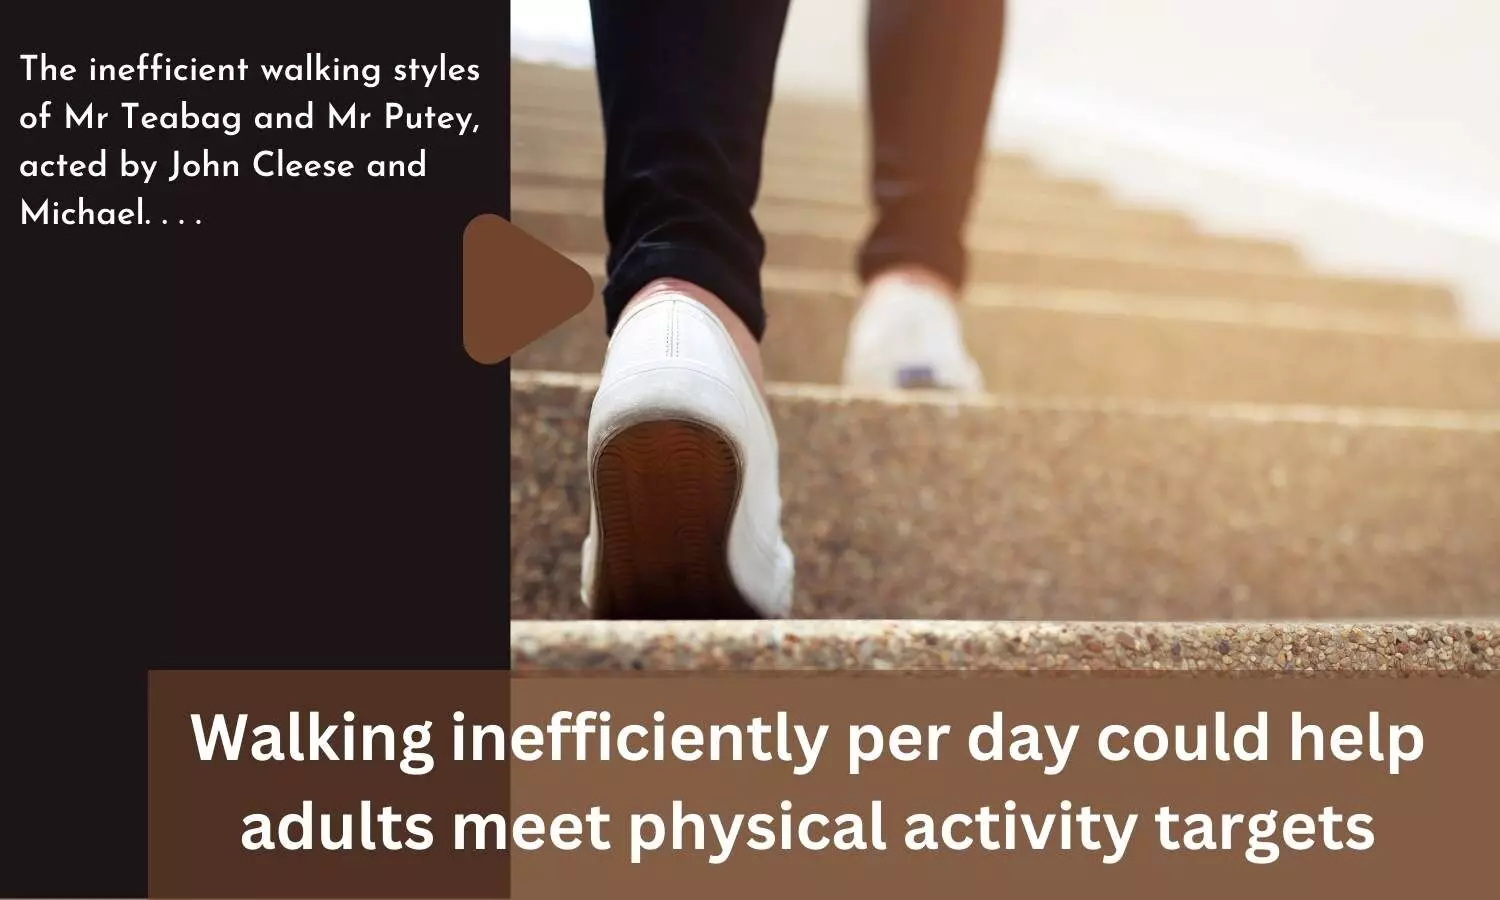 Walking inefficiently per day could help adults meet physical activity targets